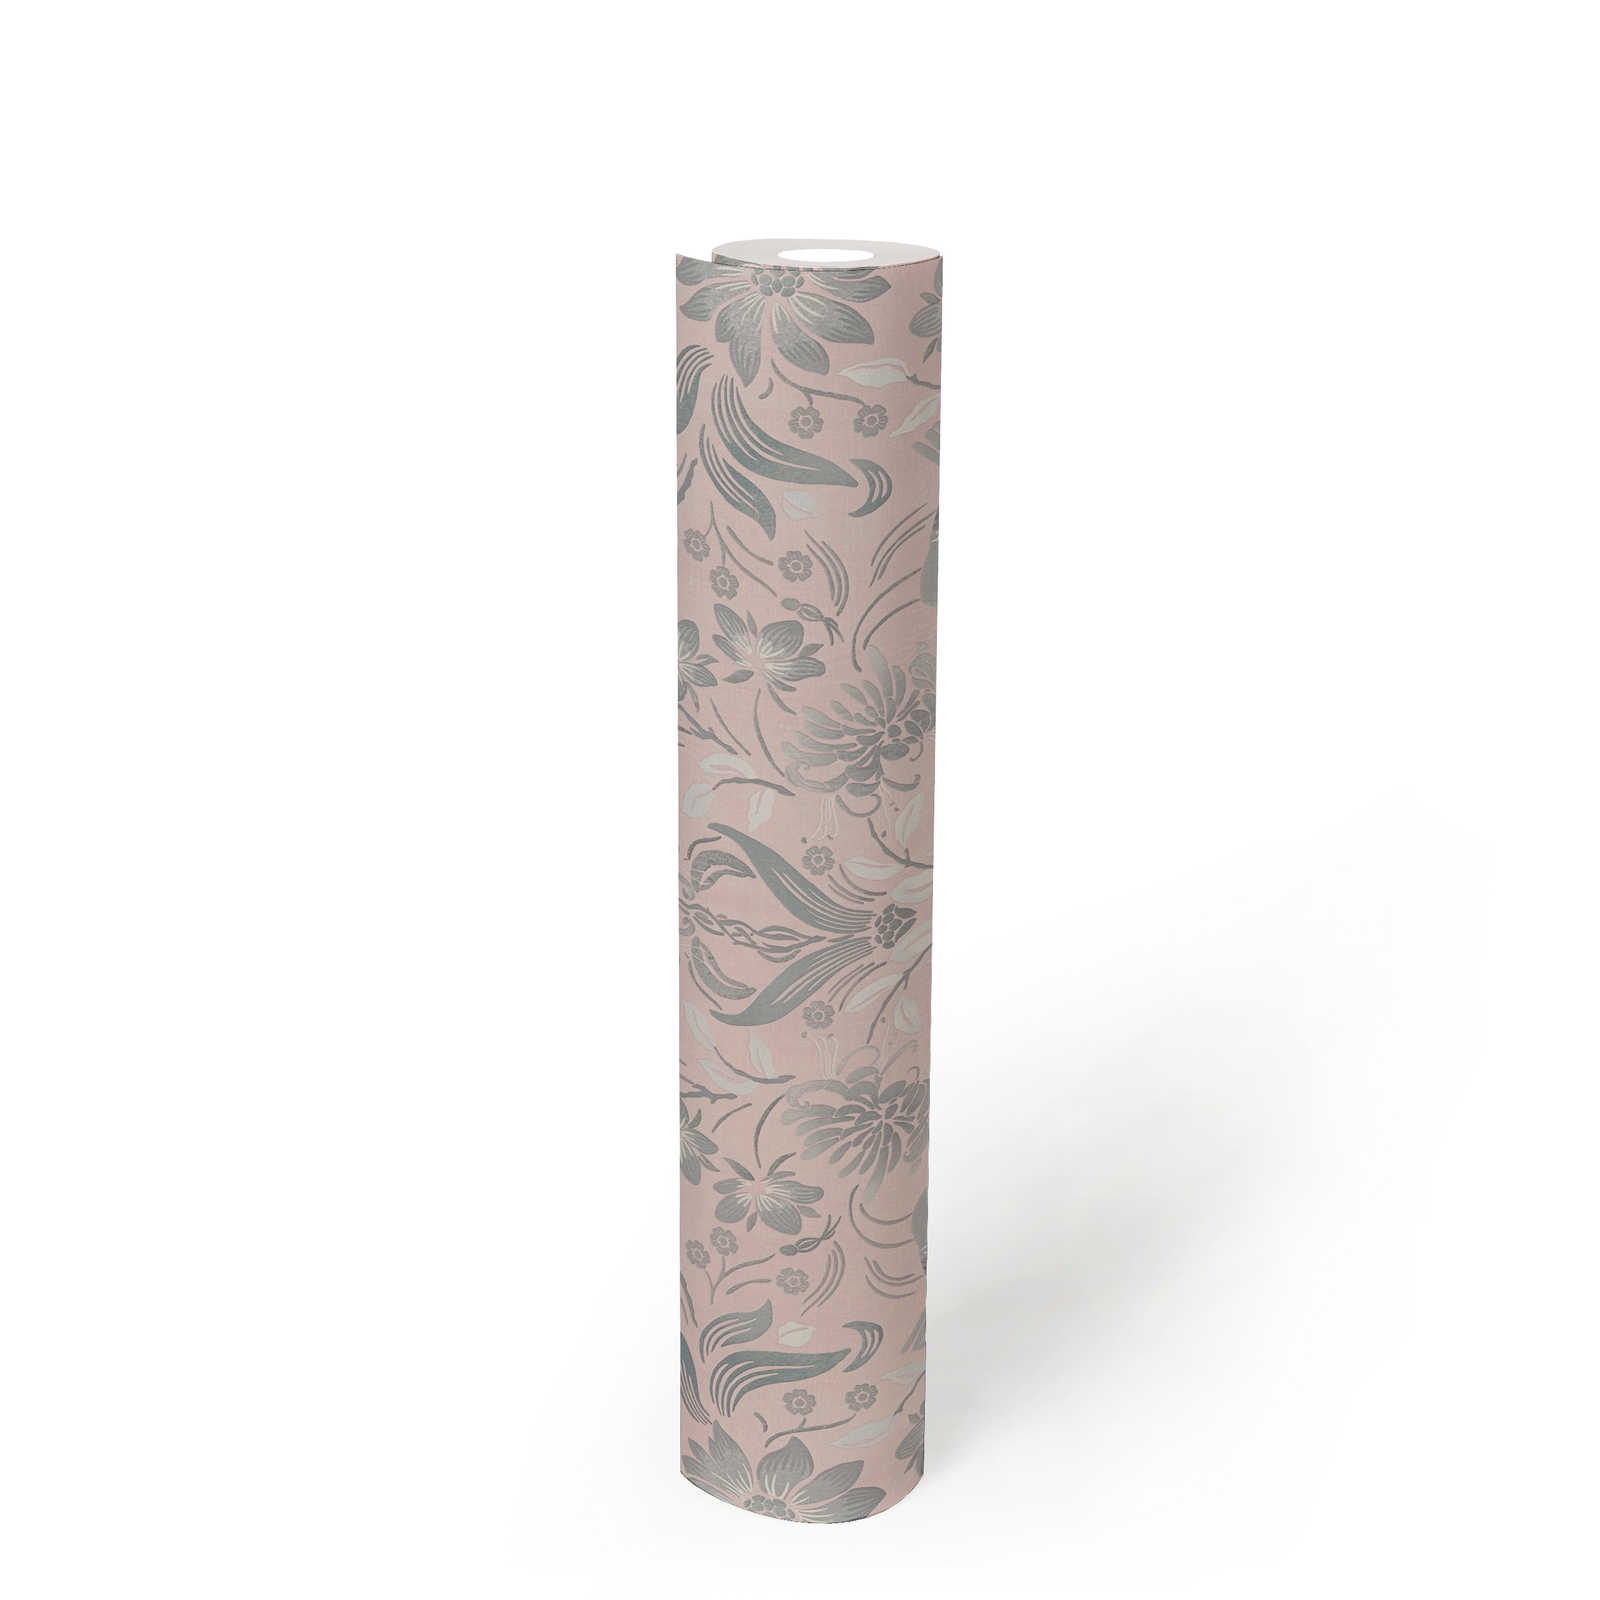             Birds and flowers wallpaper - pink, grey, white
        